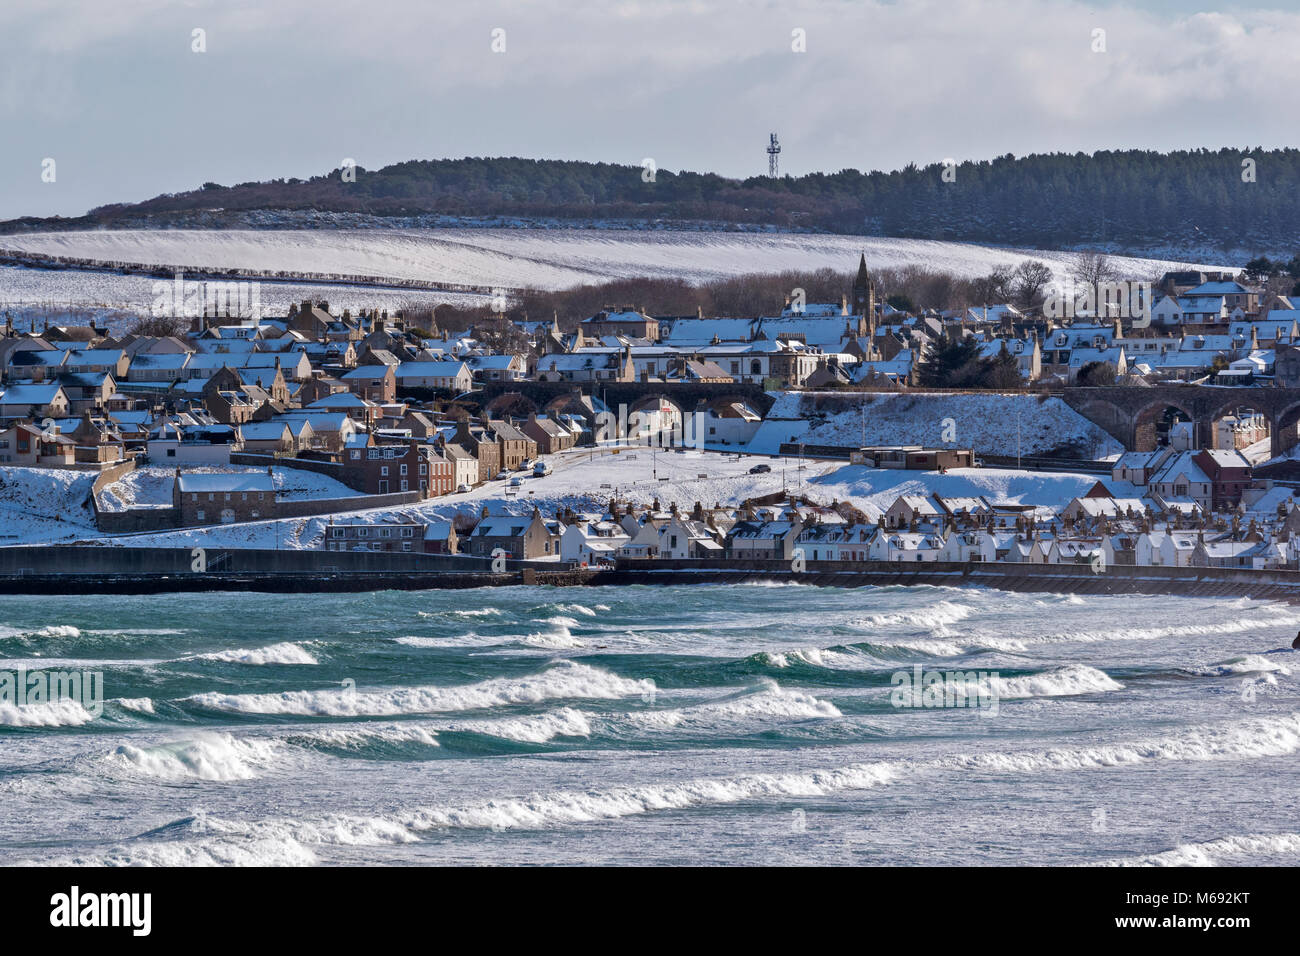 MORAY COAST SCOTLAND CULLEN BAY LARGE WAVES ON THE SEA AND WINTER SNOW ON THE HOUSES IN THE TOWN Stock Photo